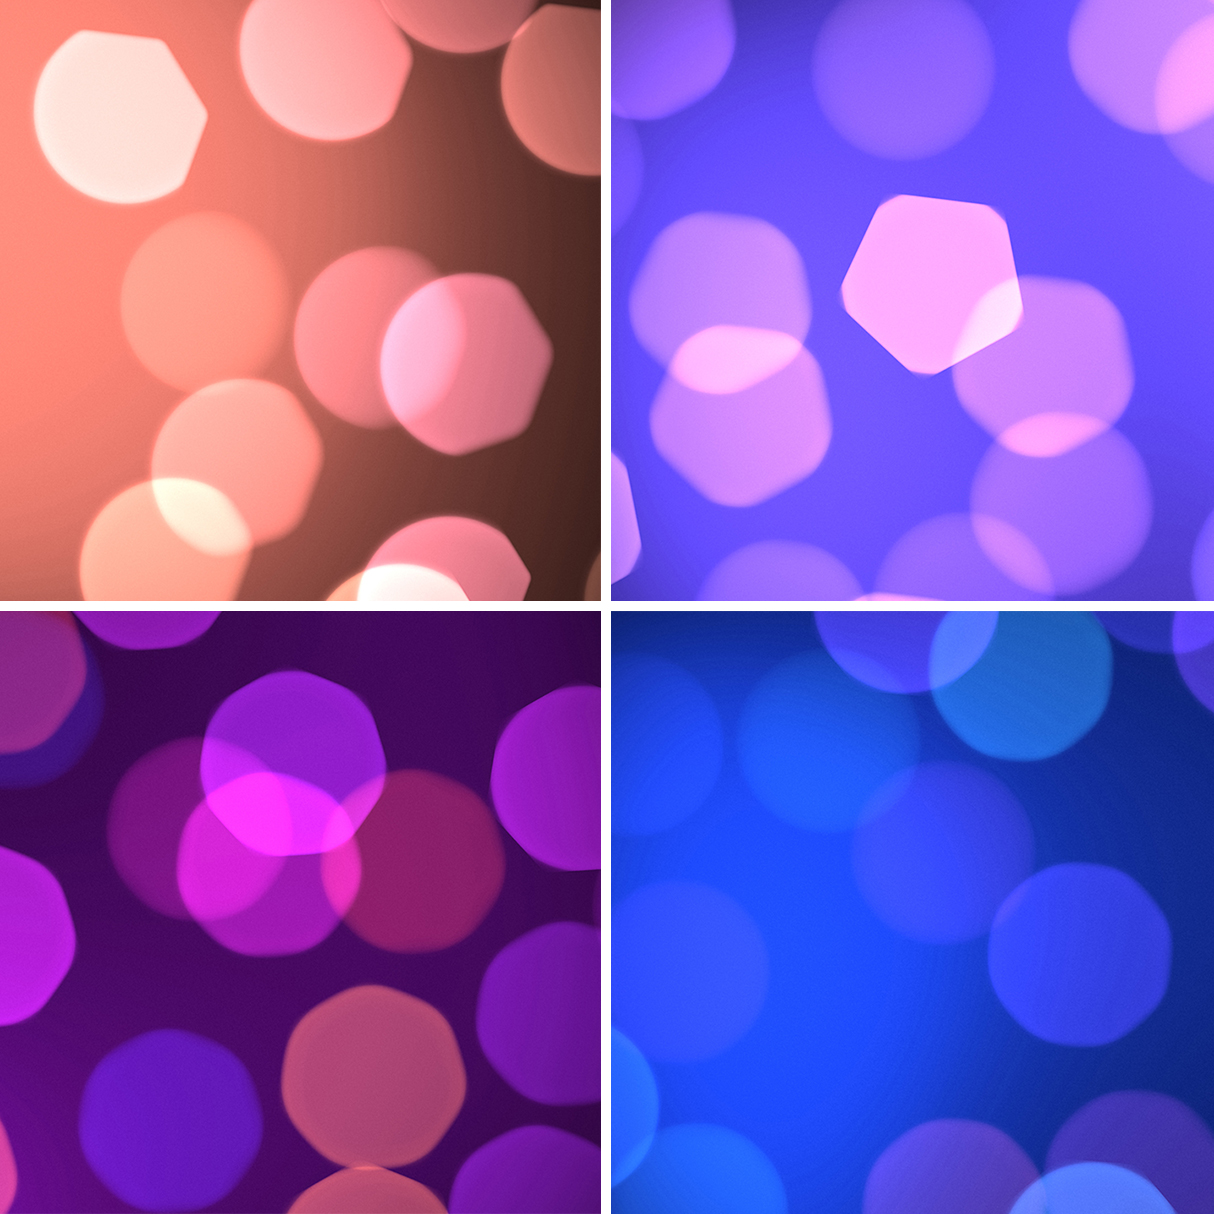 50 Bokeh Pro Backgrounds Samples Preview – Part 1